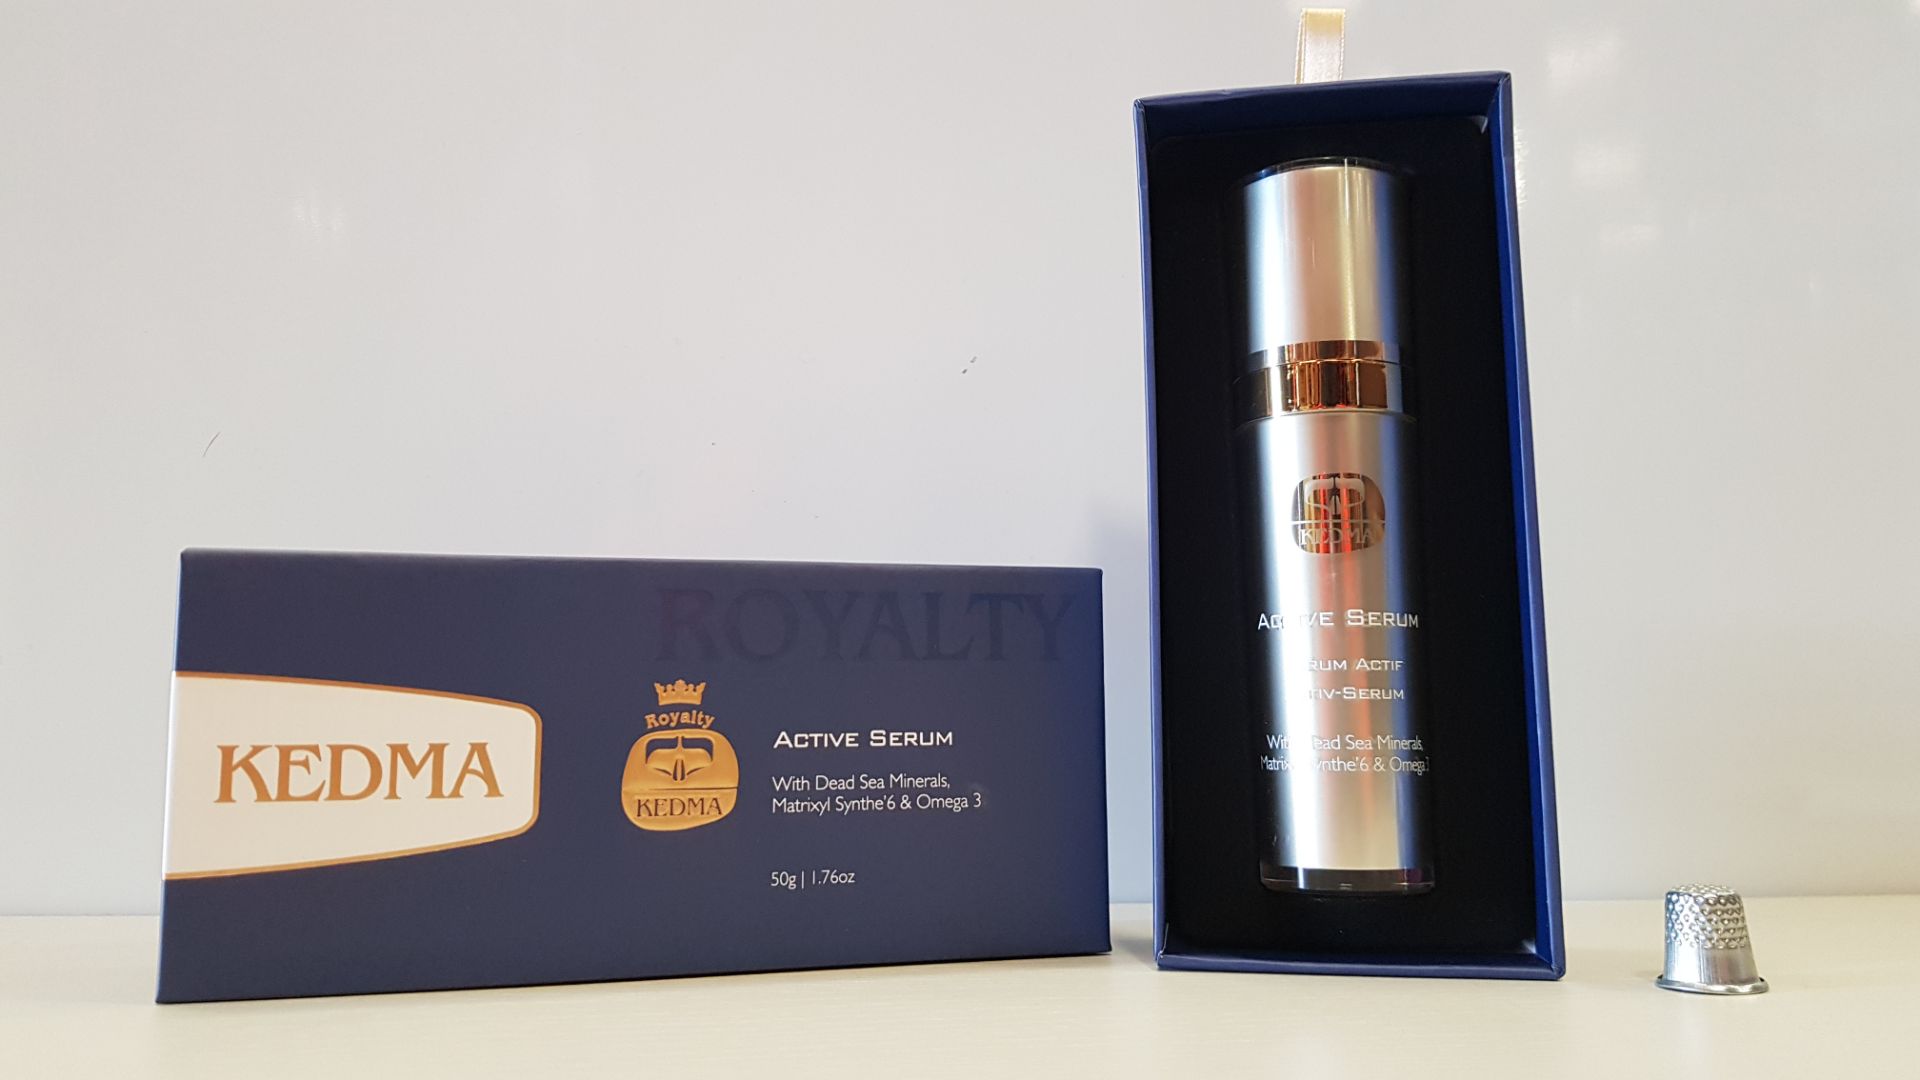 3 X BRAND NEW BOXED ROYALTY KEDMA ACTIVE SERUM WITH DEAD SEA MINERALS, MATRIXYL SYNTHE'6 & OMEGA 3 -